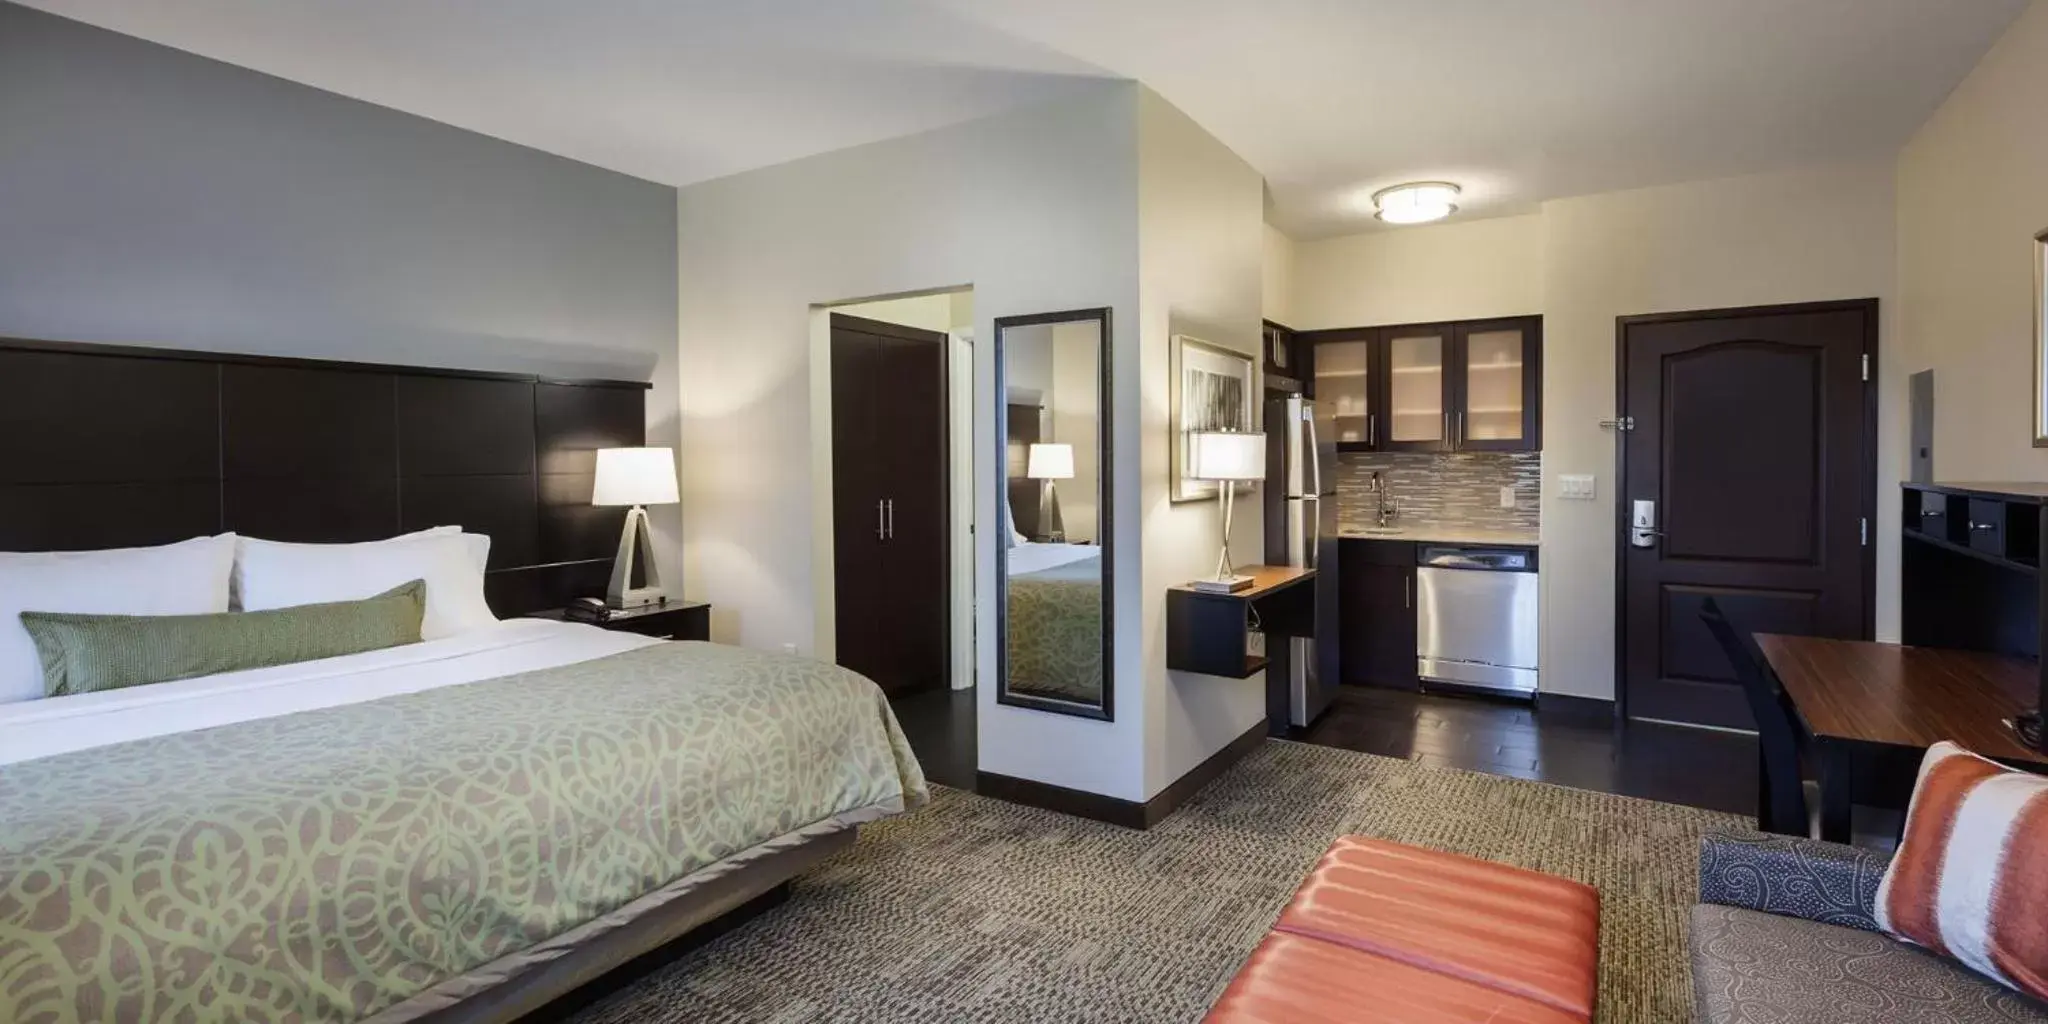 King Studio Suite with Mobility Accessible Tub - Non-Smoking in Staybridge Suites - Cedar Park - Austin N, an IHG Hotel